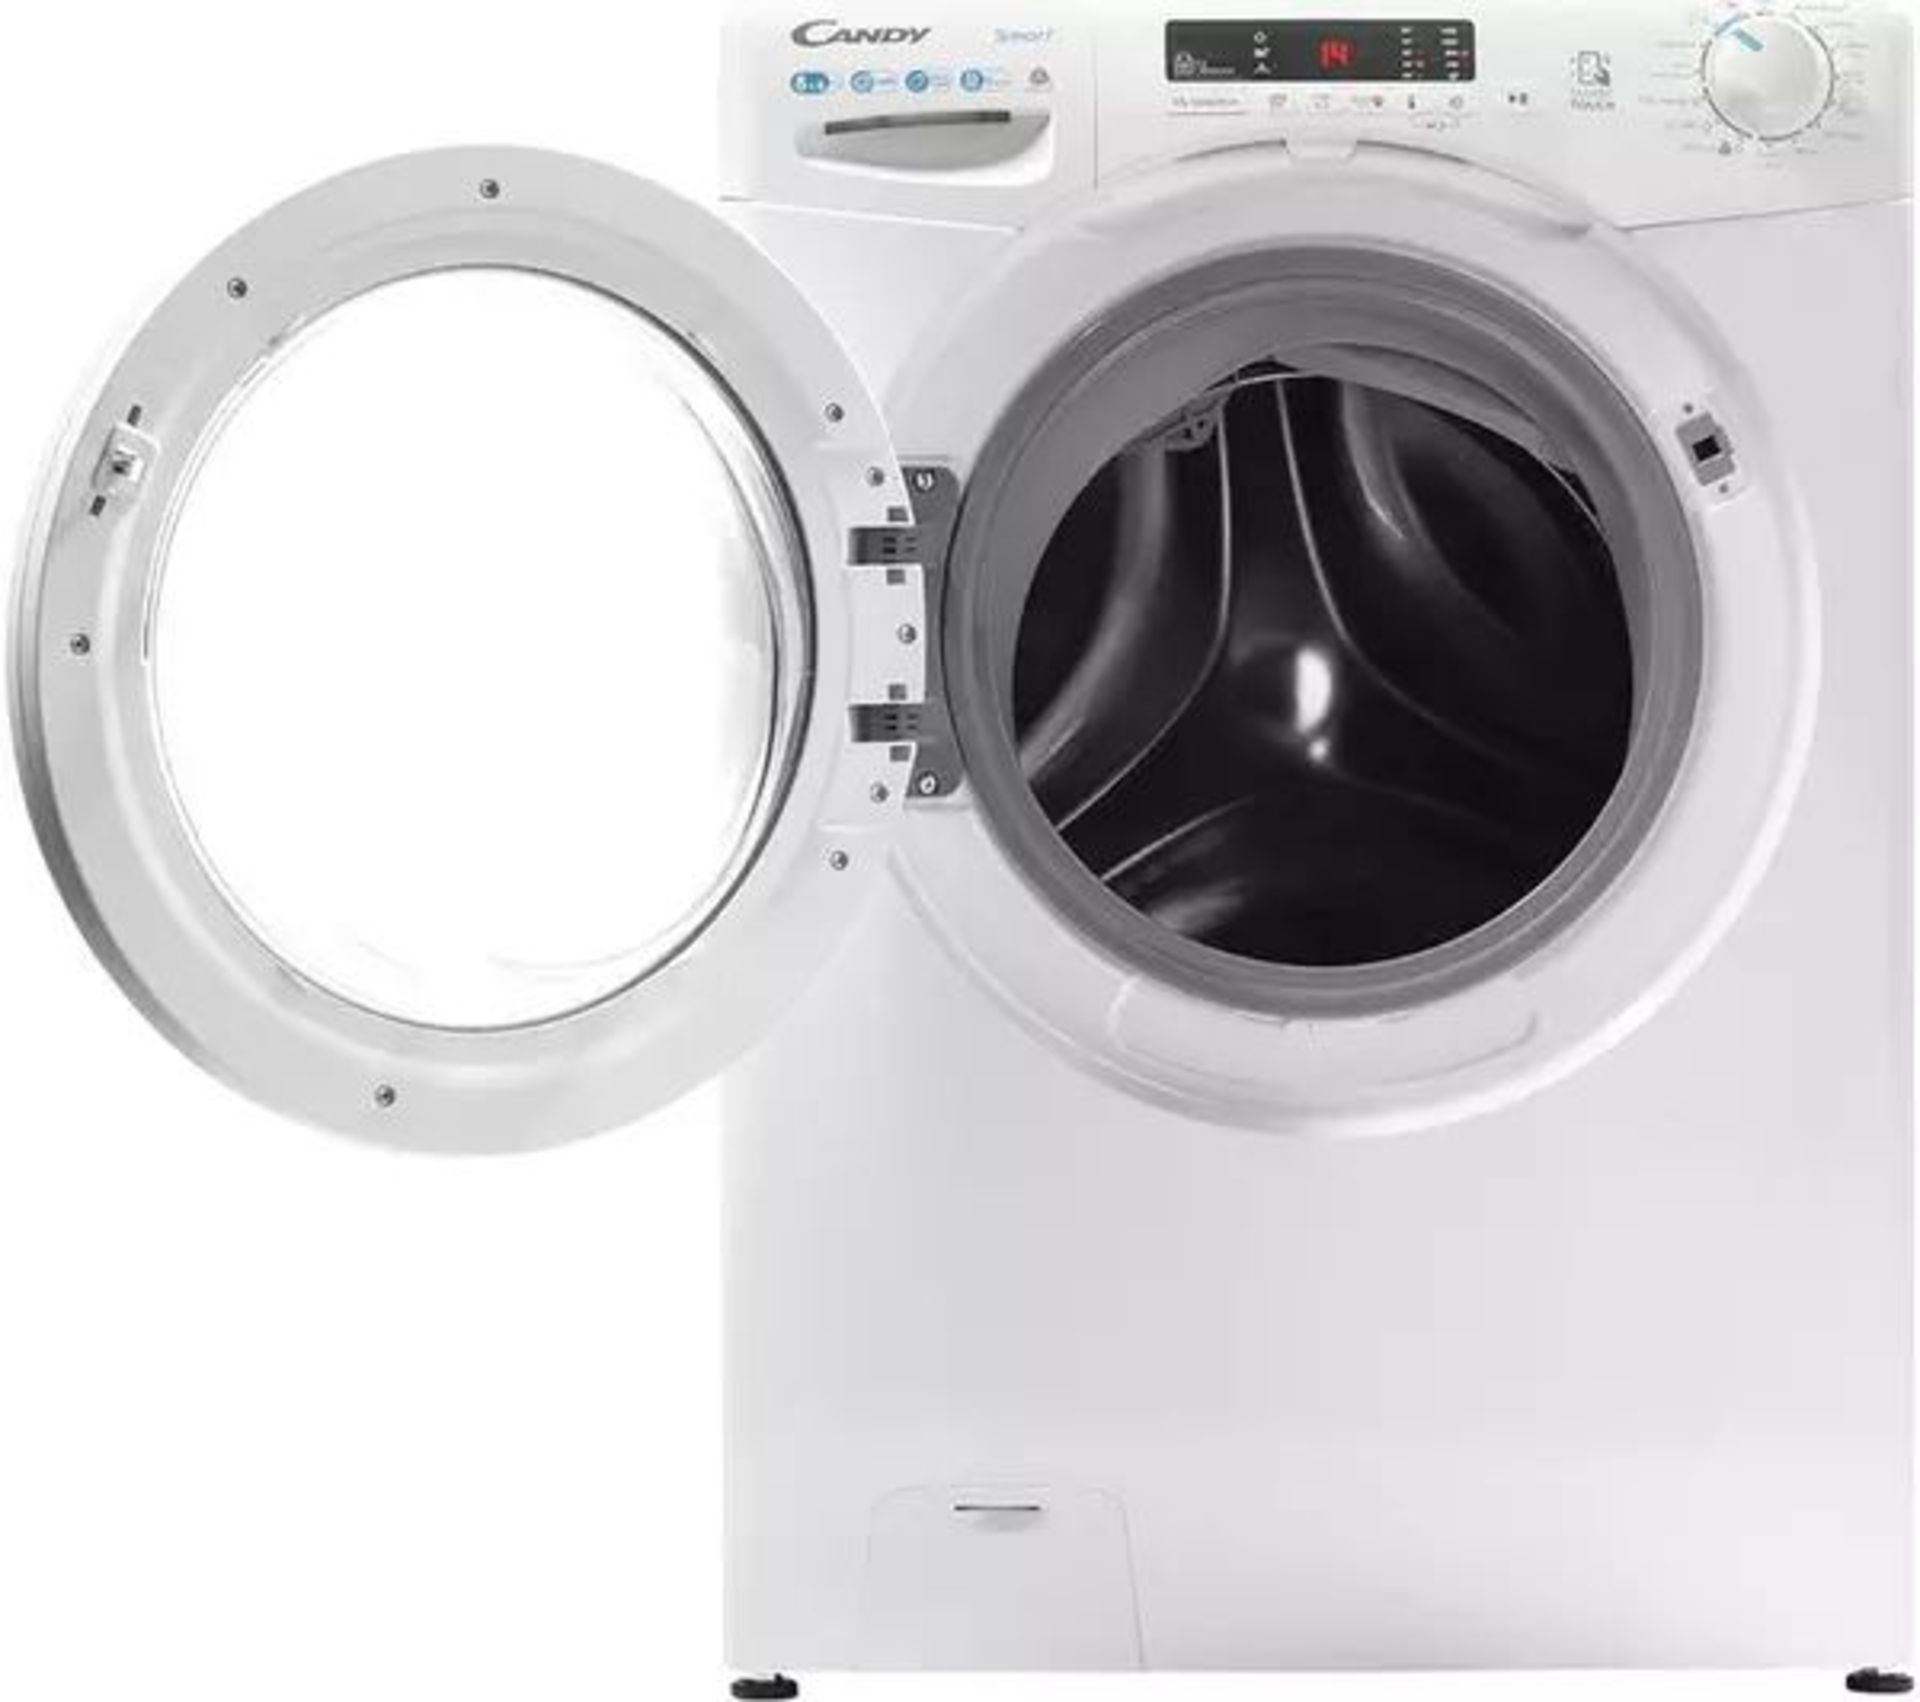 CANDY CSW 4852DE NFC 8 kg Washer Dryer – White. - S2. RRP £529.00. With the Candy CSW 4852DE NFC 8 - Image 2 of 2